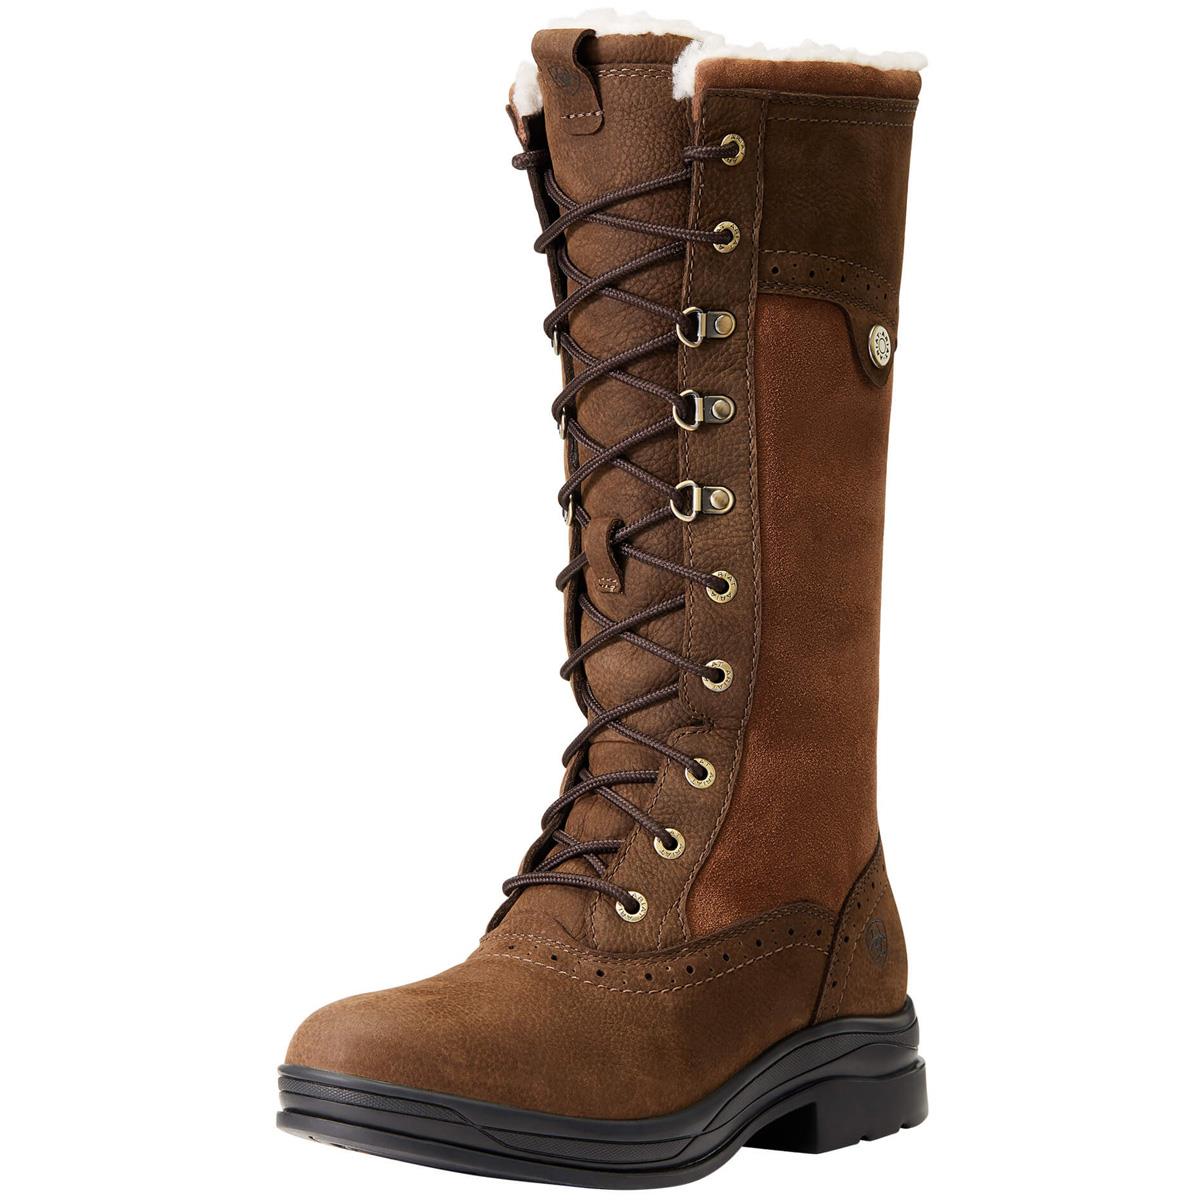 Ariat Womens Wythburn II Waterproof Insulated Boots Questions & Answers